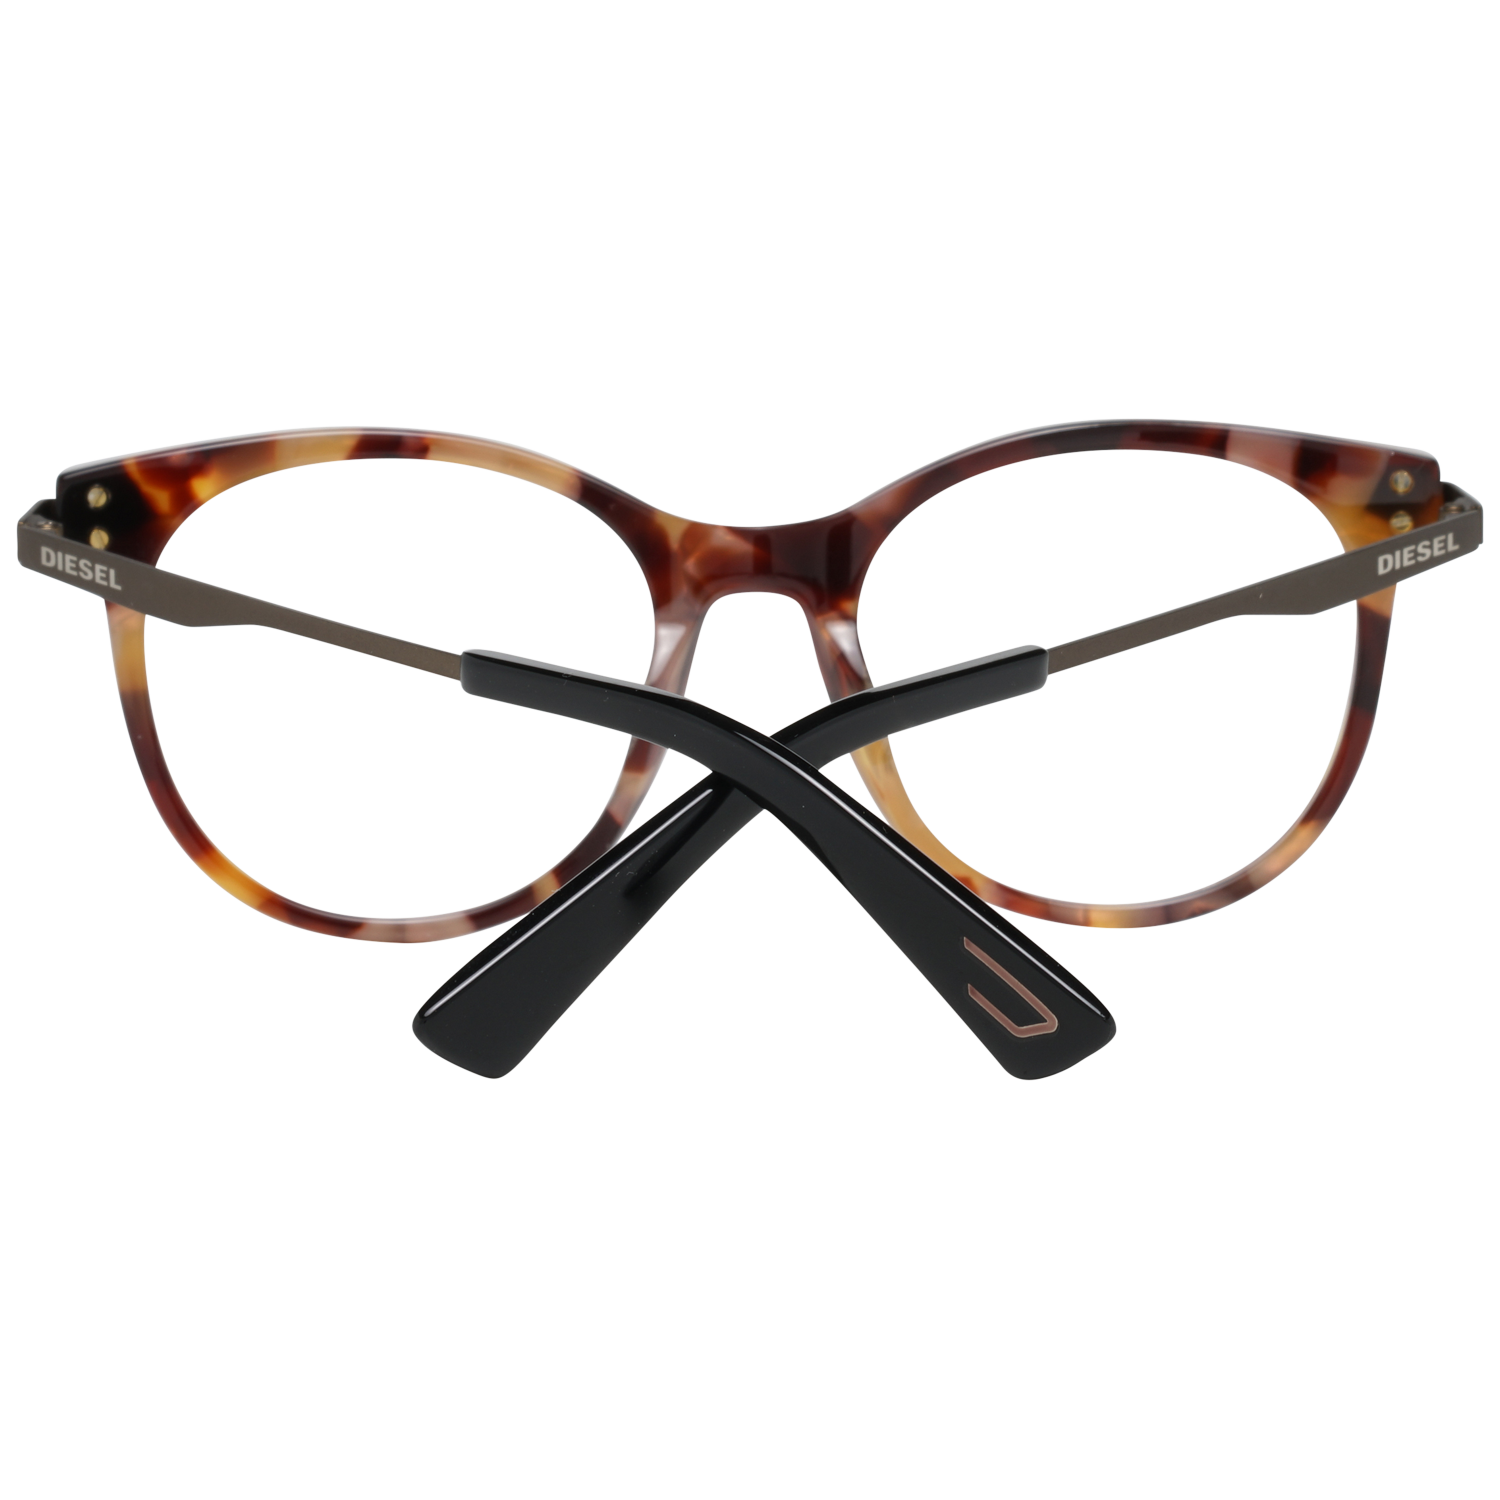 GenderWomenMain colorBrownFrame colorBrownFrame materialMetal & PlasticSize50-18-140Lenses width50mmLenses heigth44mmBridge length18mmFrame width140mmTemple length140mmShipment includesCase, Cleaning clothStyleFull-RimSpring hingeNoExtraNo extra